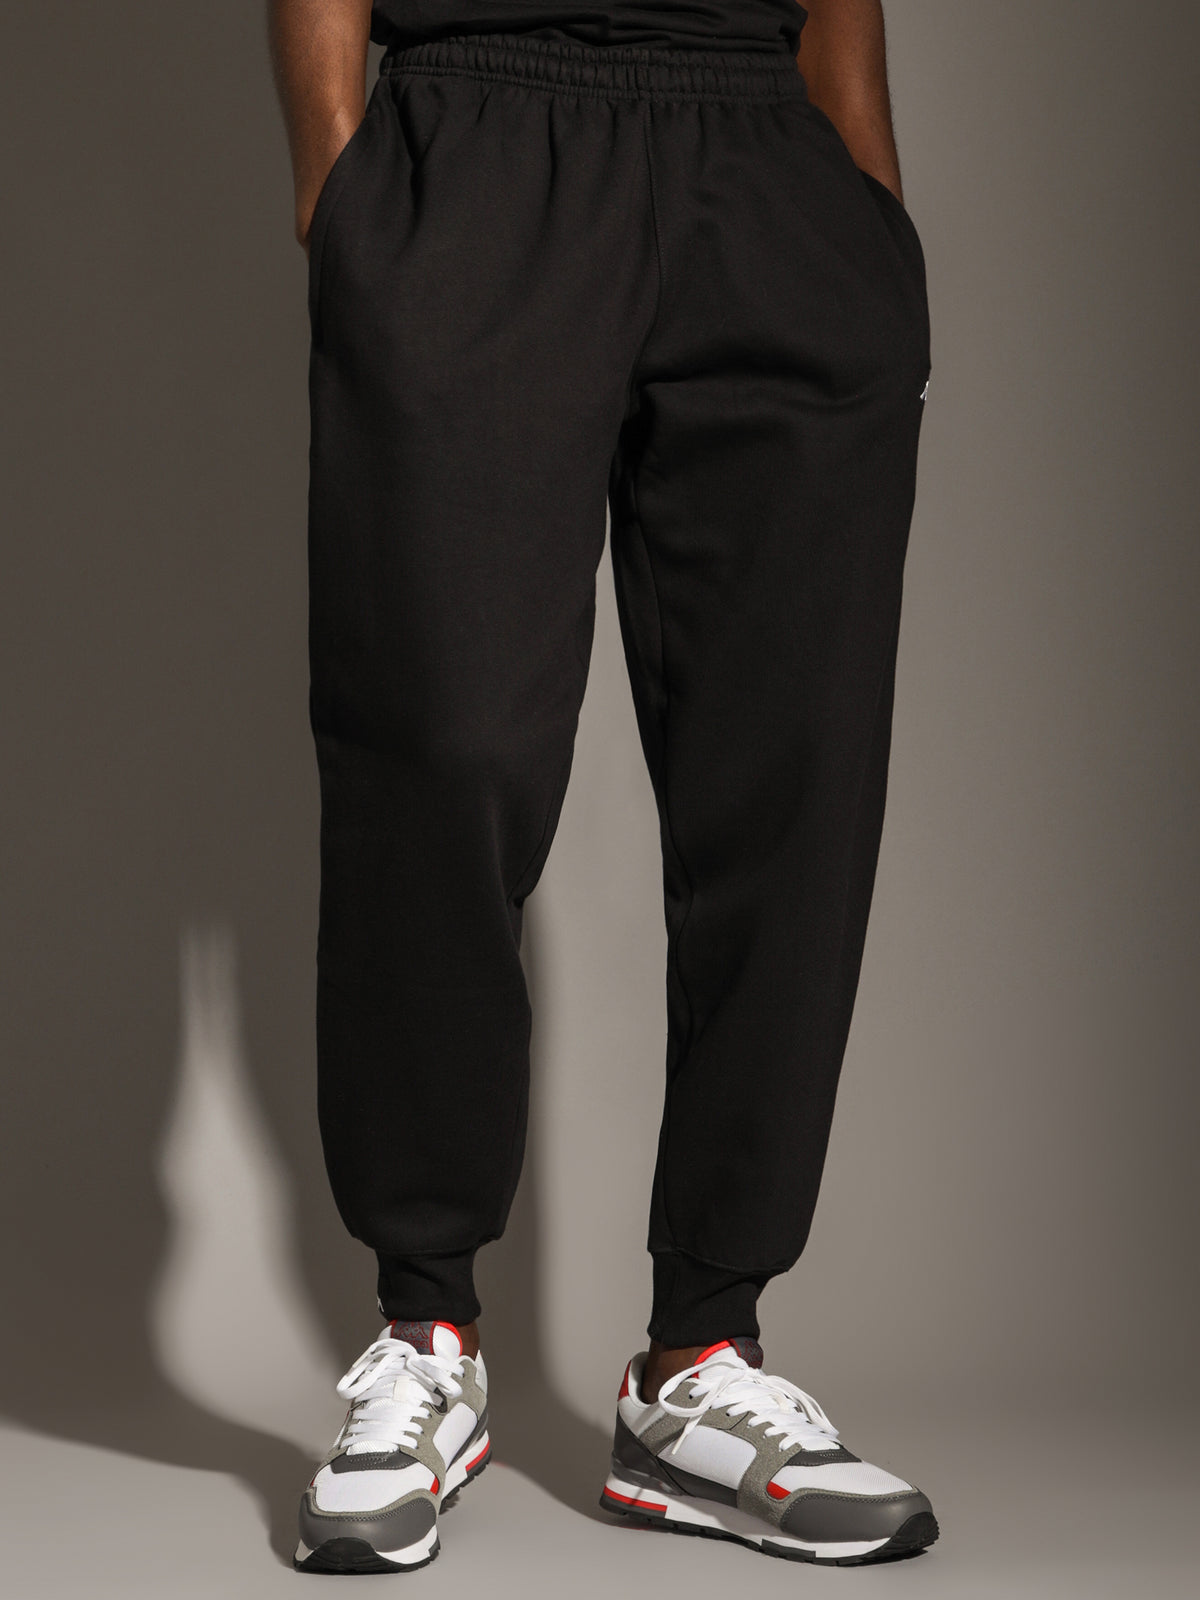 Authentic Scar Track Pants in Black